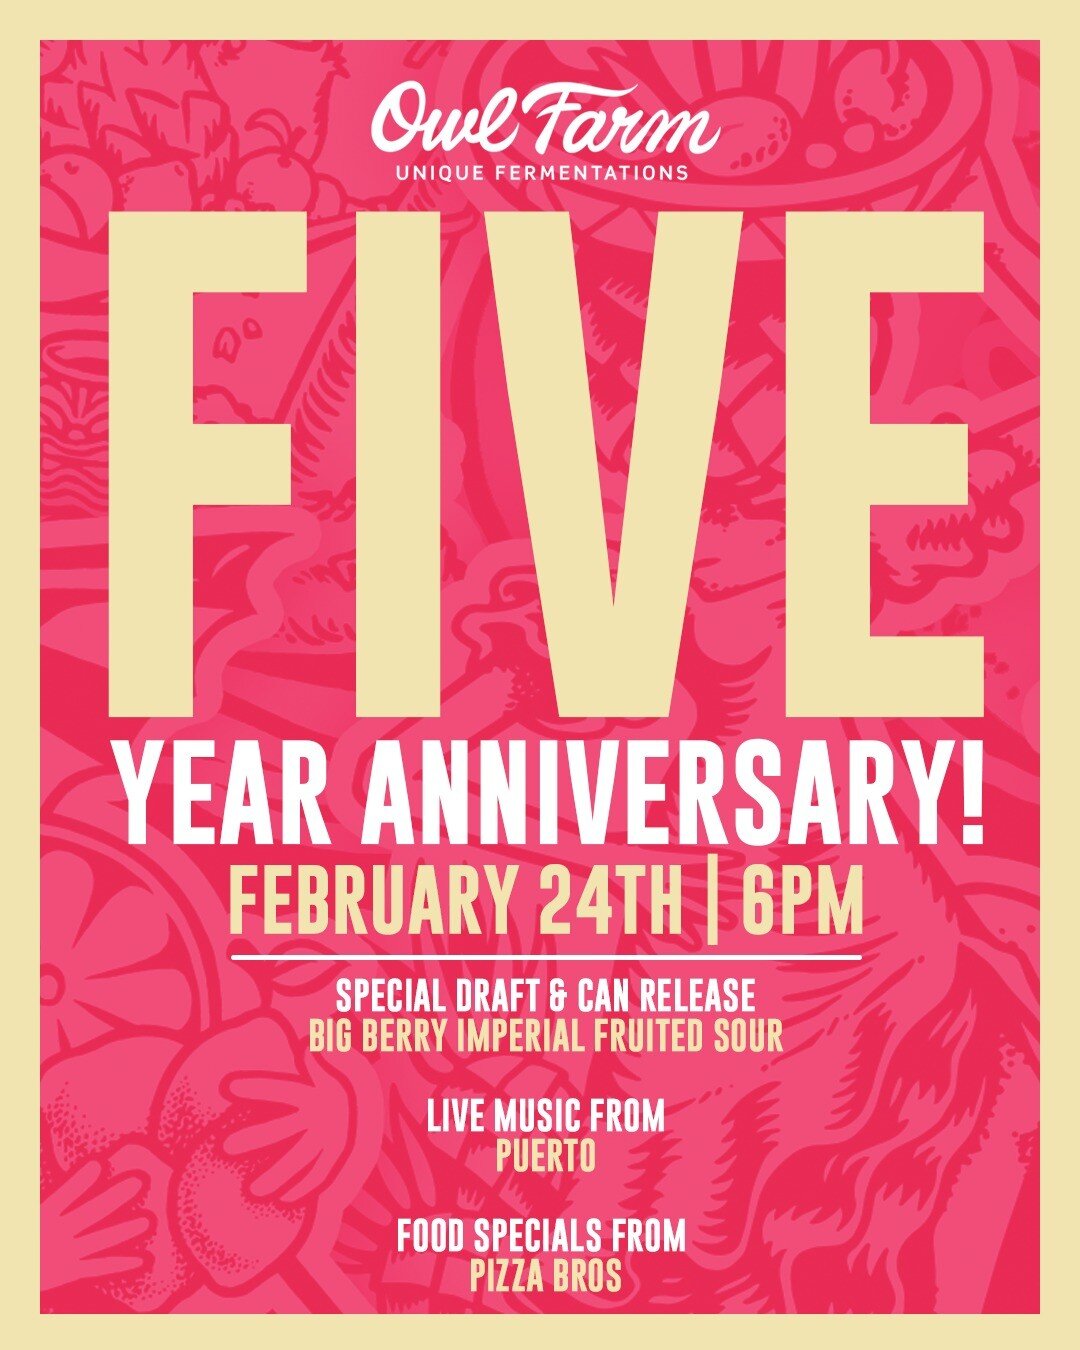 WE ARE TURNING 5!

We are really looking forward to this Friday 2/24 to celebrate 5 years of Owl Farm! We can't thank everyone enough for the support over the years and we would love to celebrate with everyone! 

Please join us for an amazing night f